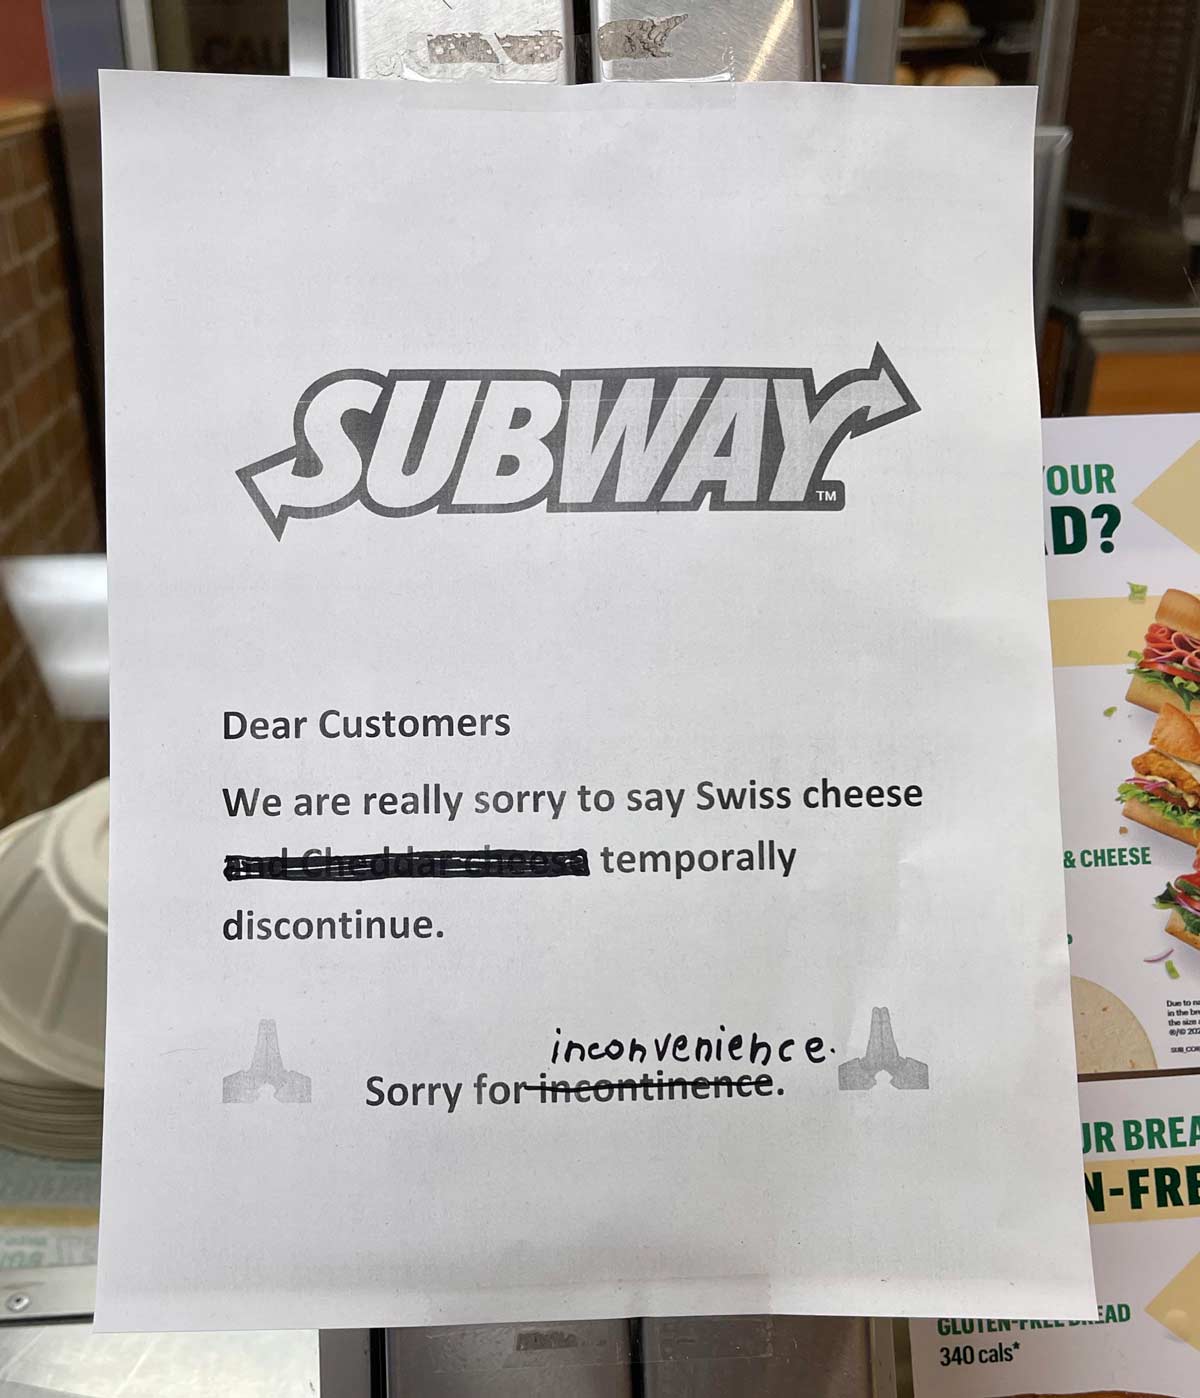 Found in a local Subway